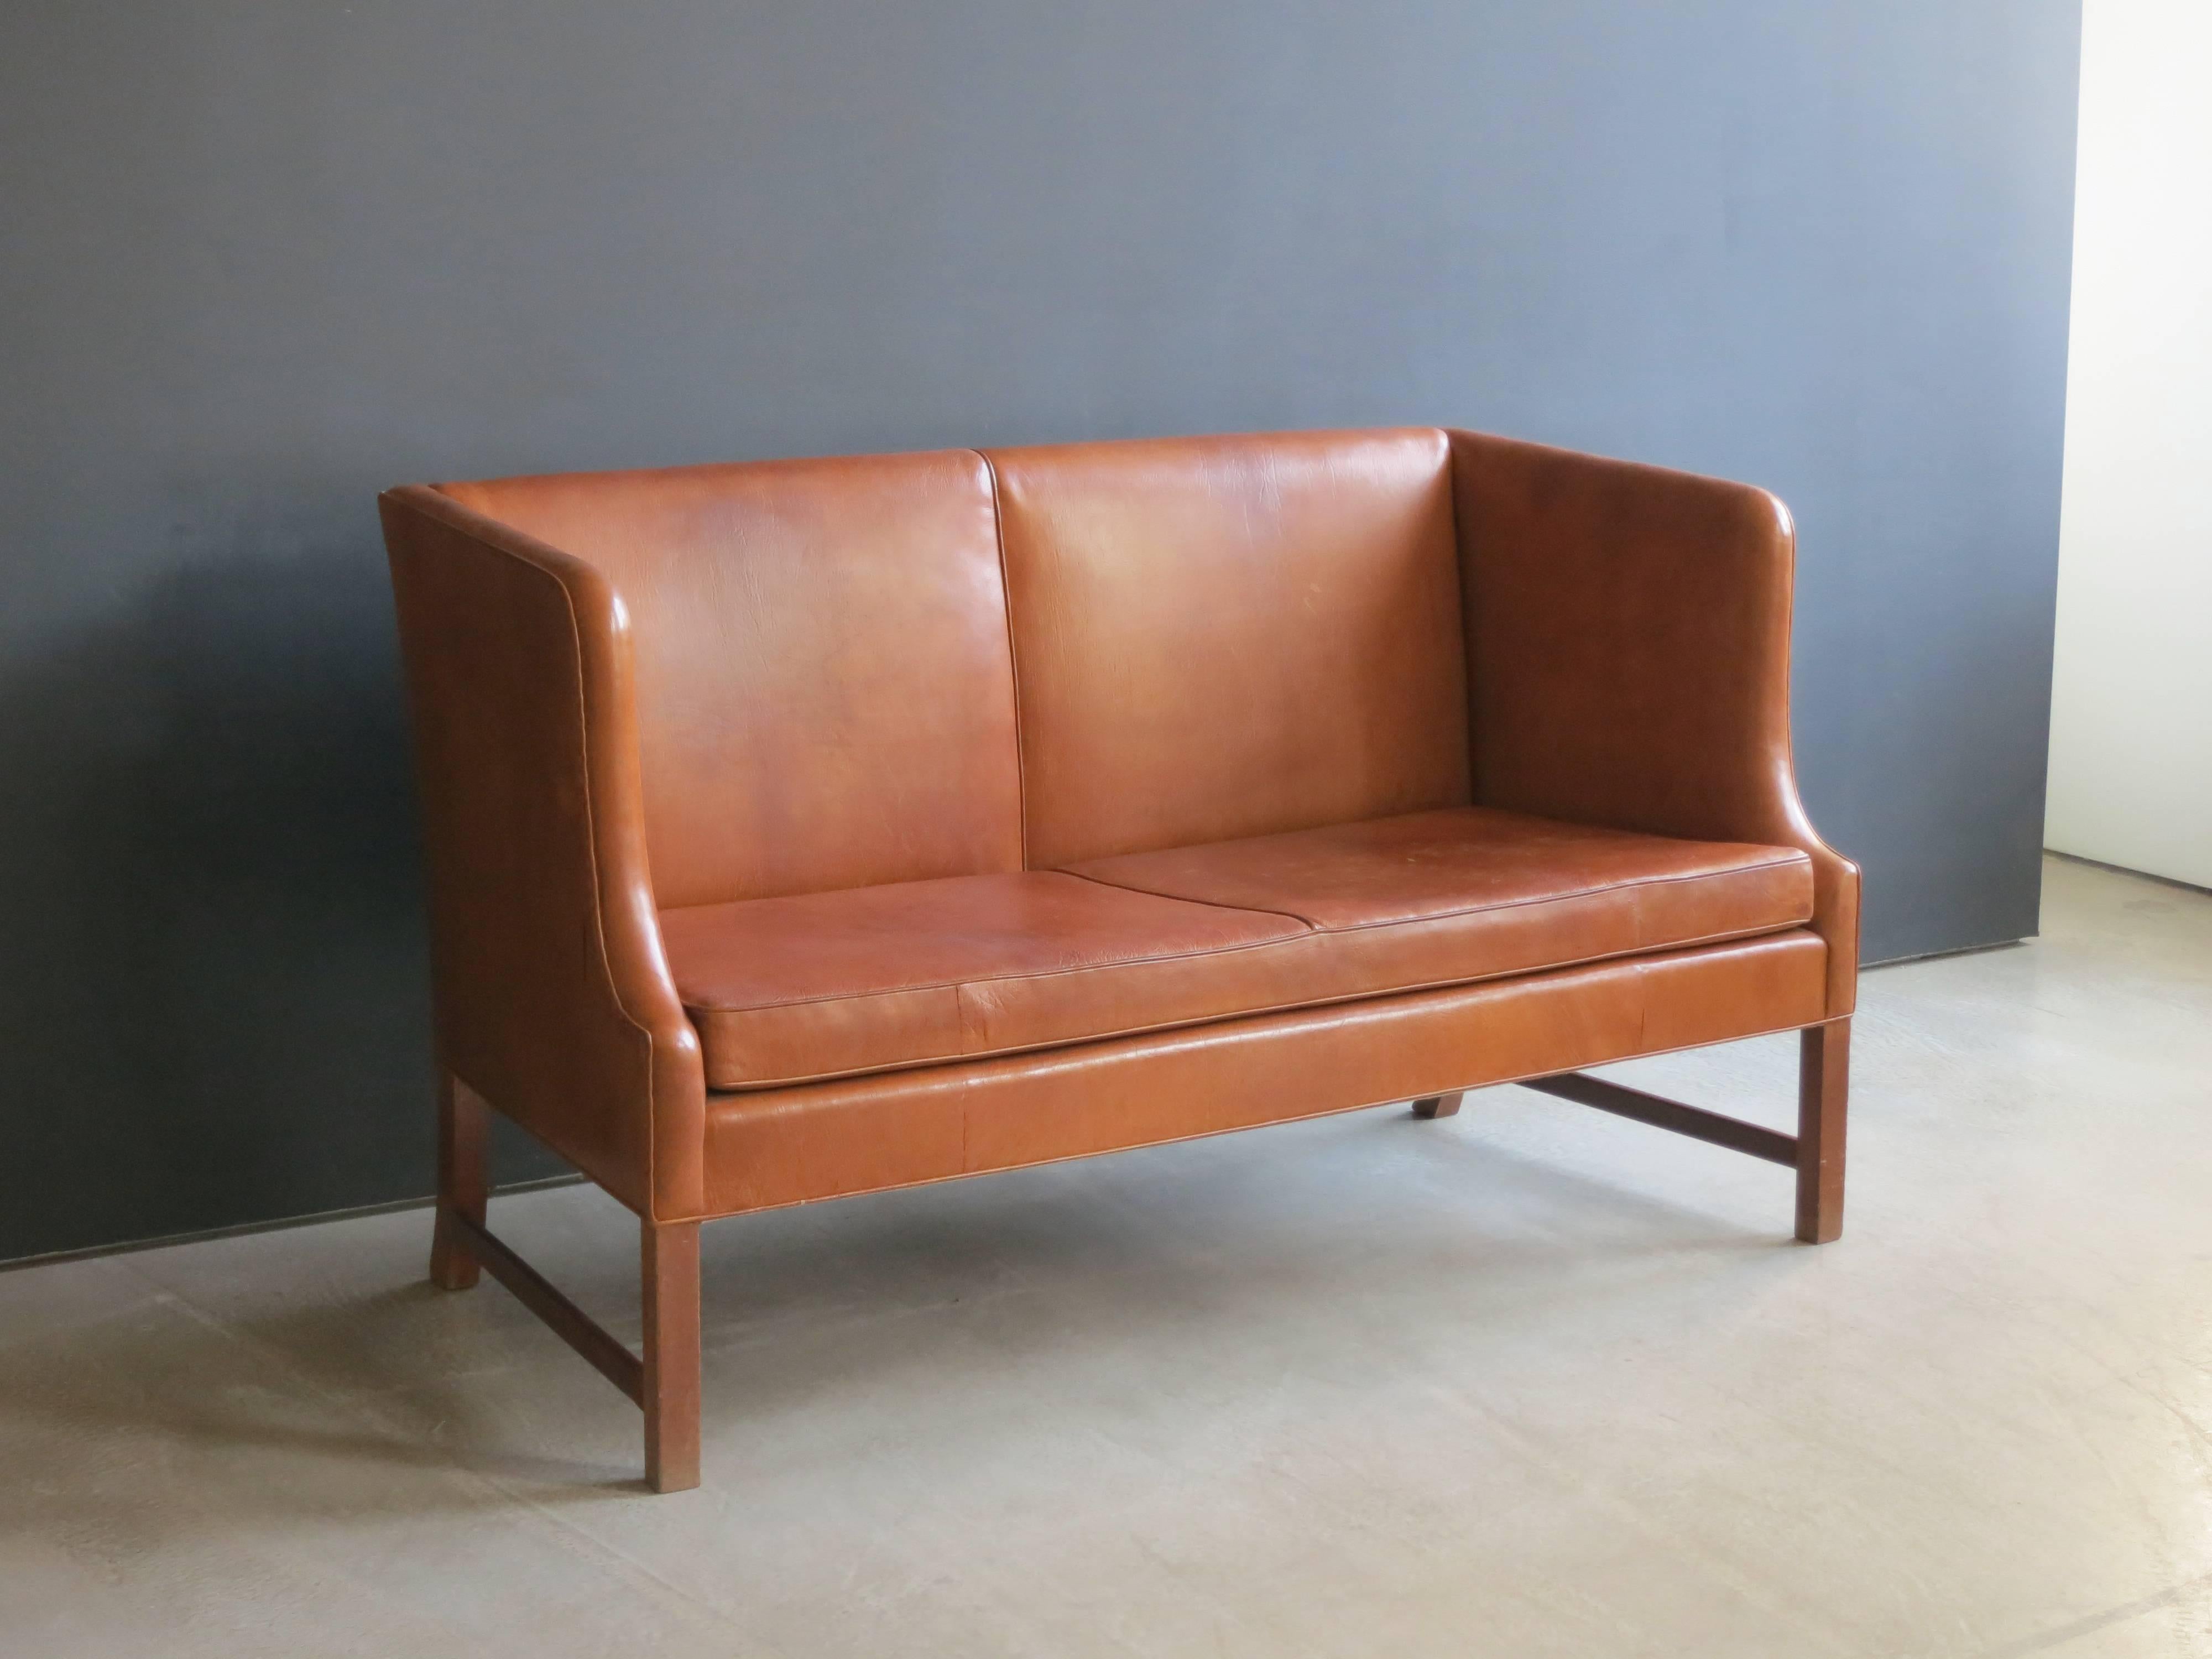 A well-proportioned and extremely comfortable sofa that was first presented at the 1937 World's Fair in Paris as part of the Danish Pavilion.

The legs are of cuban mahogany and the upholstery is of a highly patinated Nigerian goatskin.

Made by